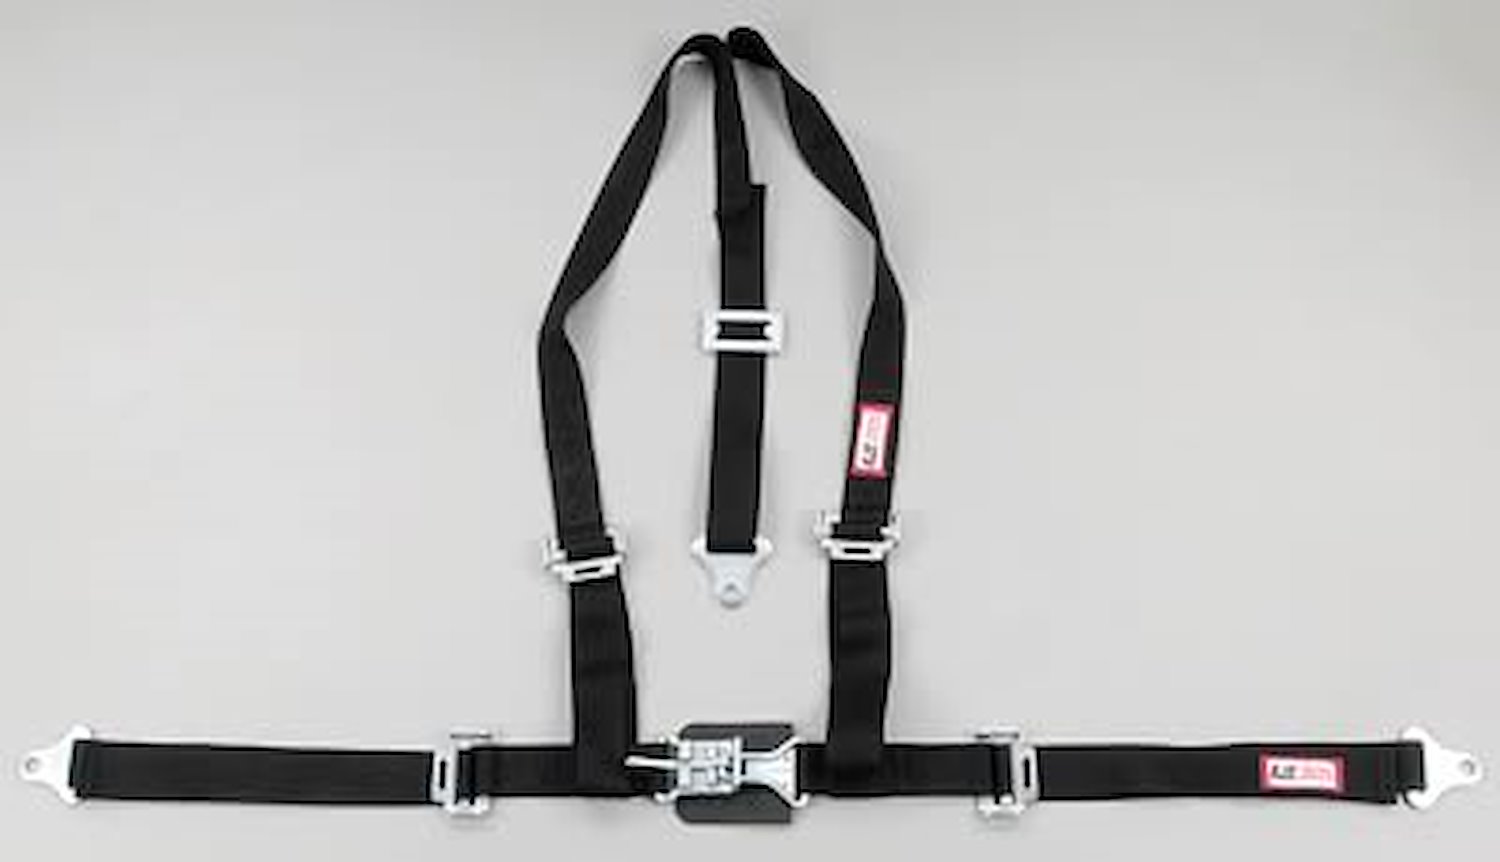 NON-SFI L&L HARNESS 3 PULL UP Lap Belt SEWN IN 2 S.H. Individual FLOOR Mount w/STERNUM STRAP ALL WRAP ENDS BLACK